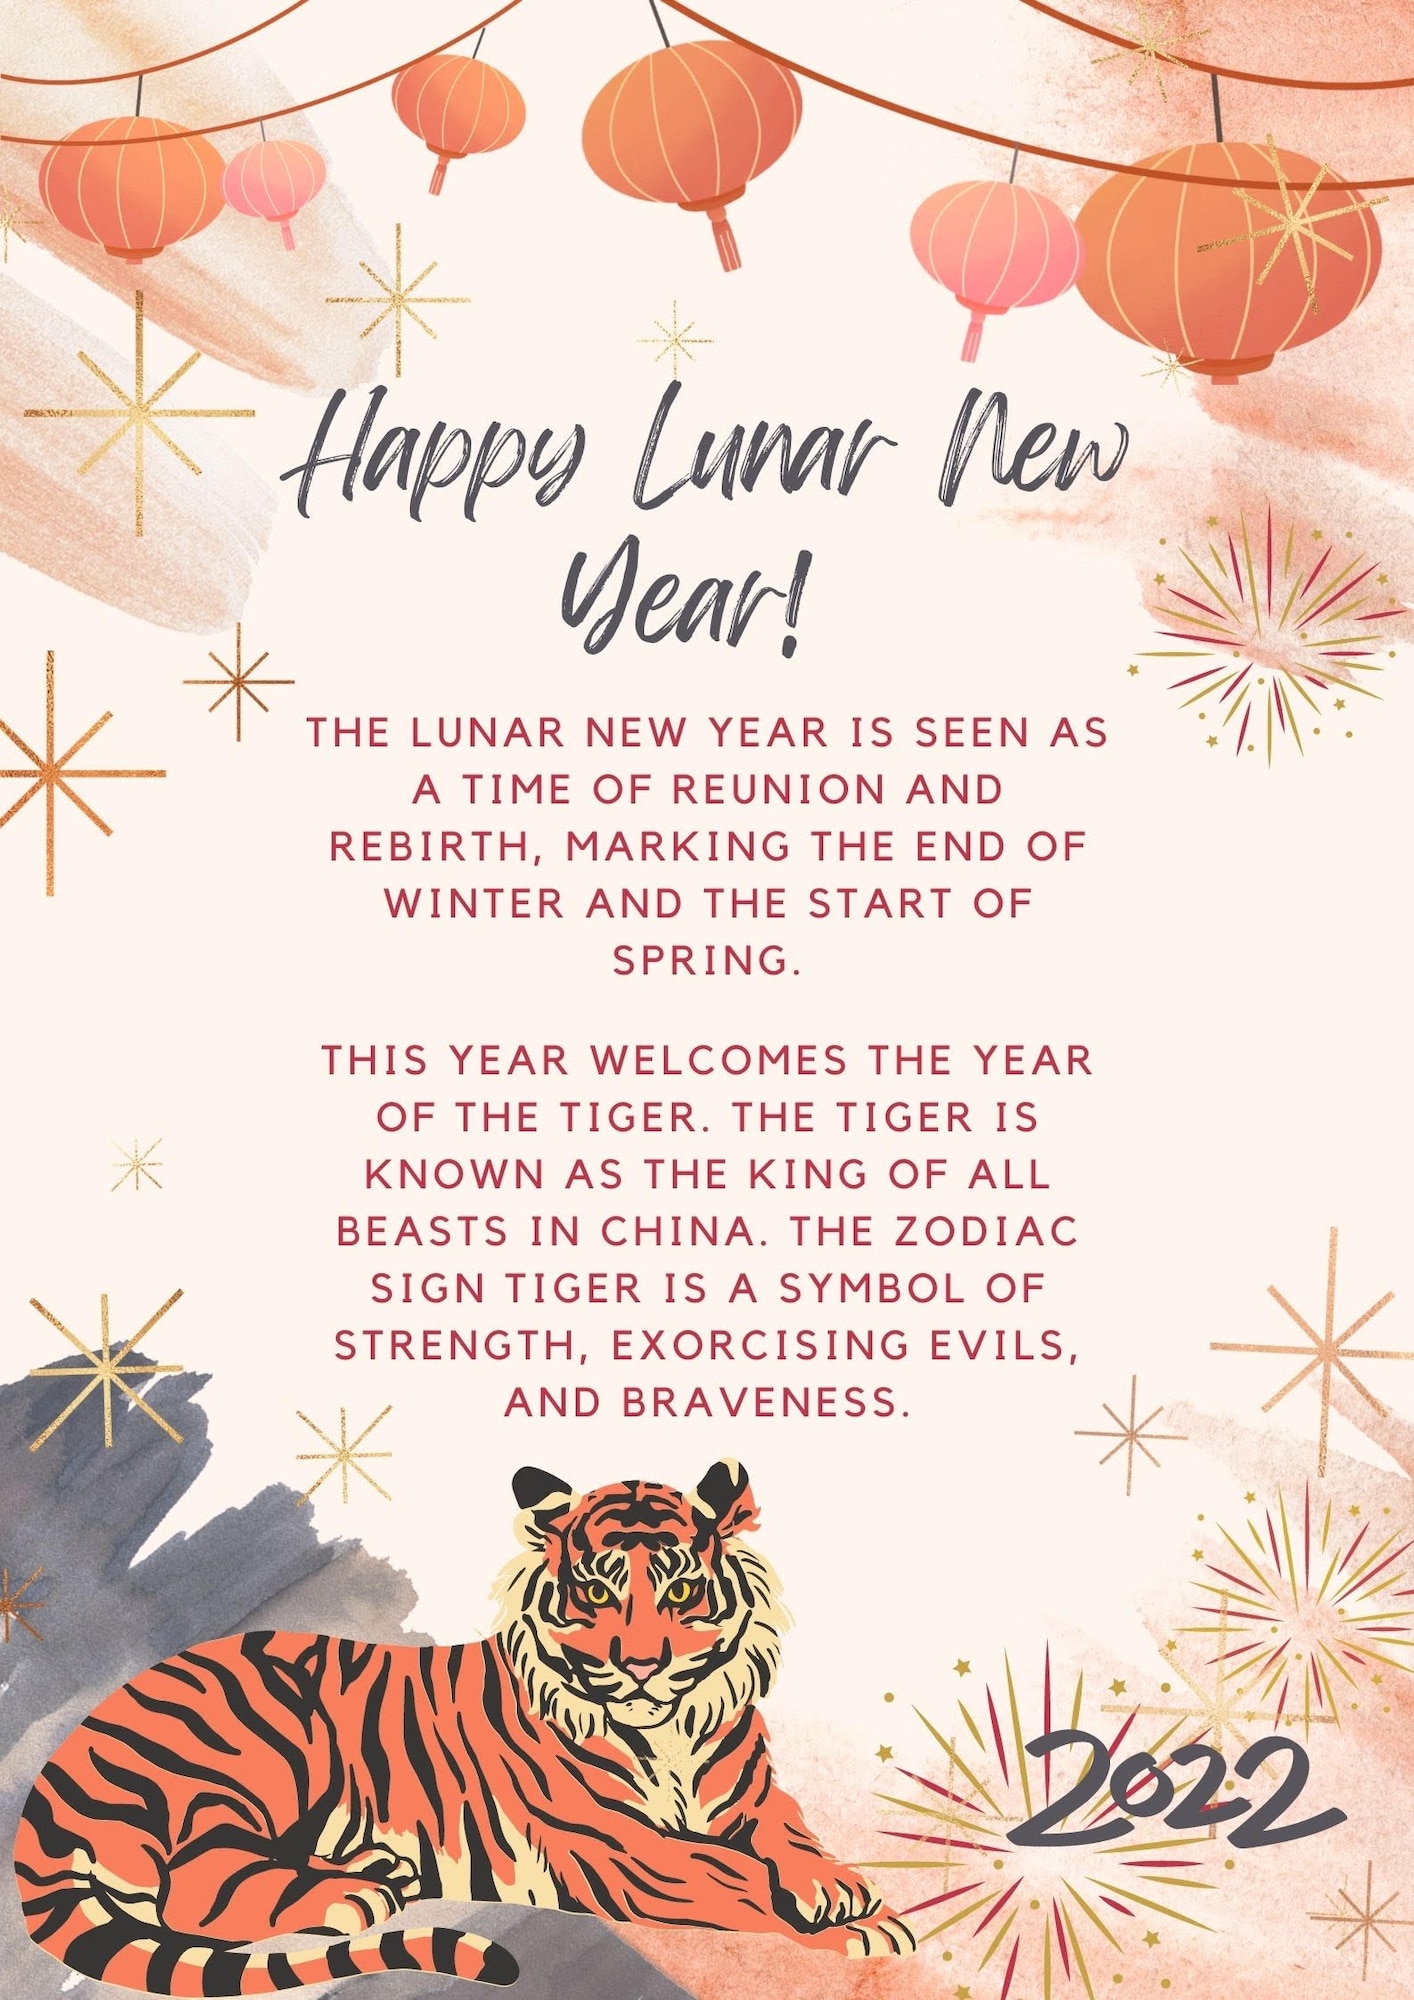 The Lunar New Year is seen as a time of reunion and rebirth, marking the end of winter and the start of spring.